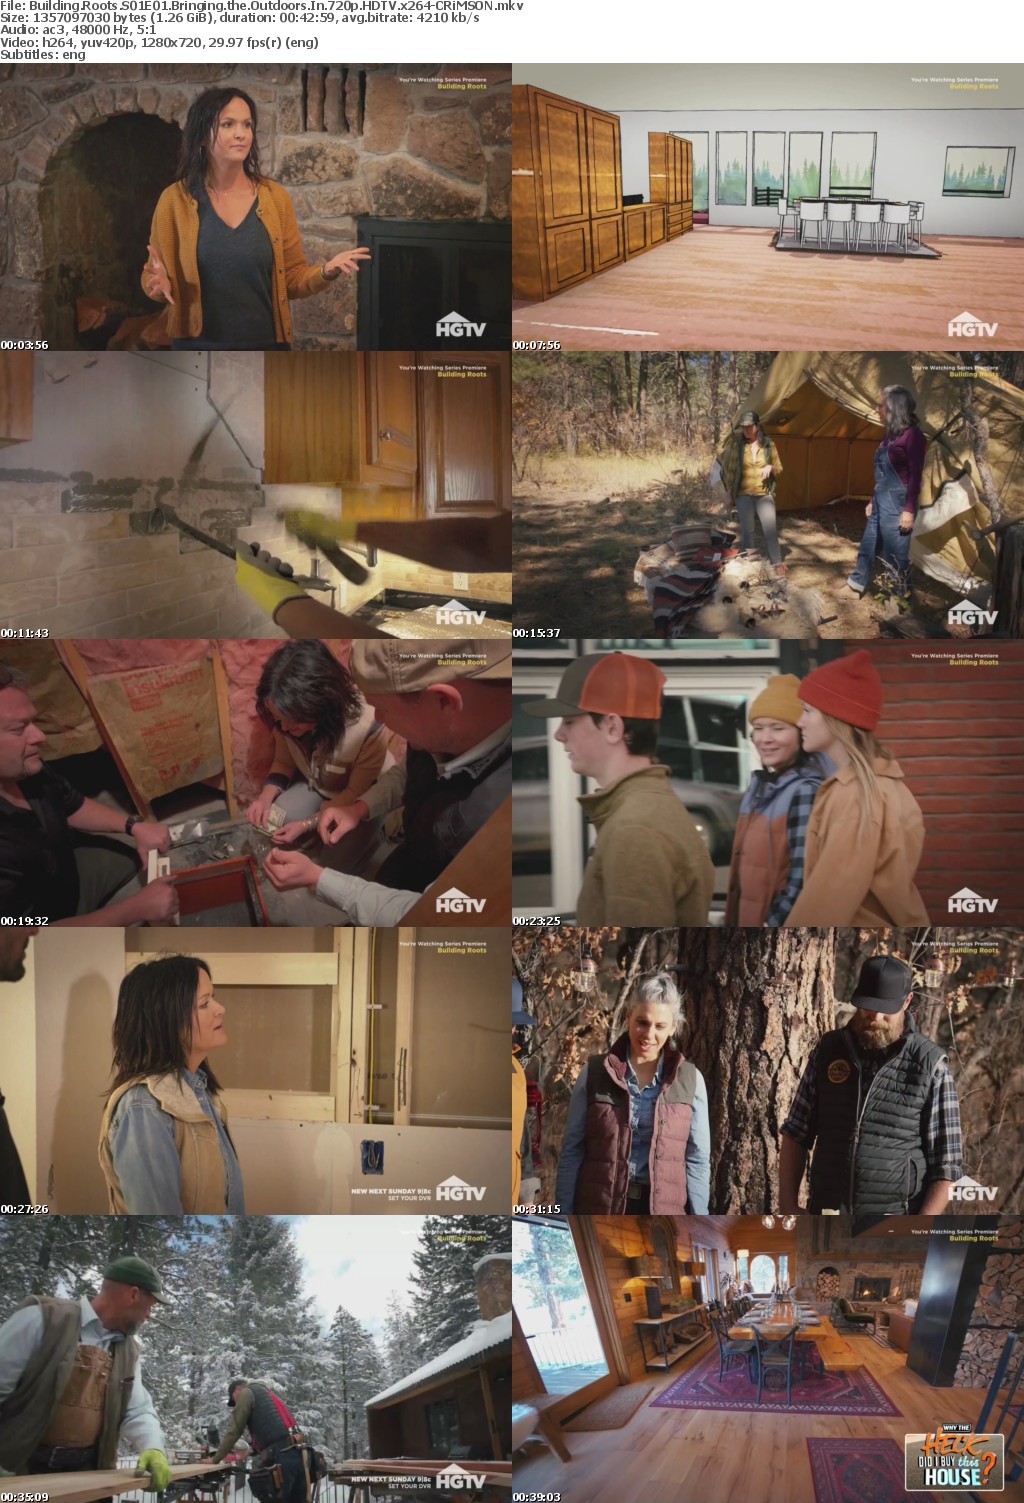 Building Roots S01E01 Bringing the Outdoors In 720p HDTV x264-CRiMSON